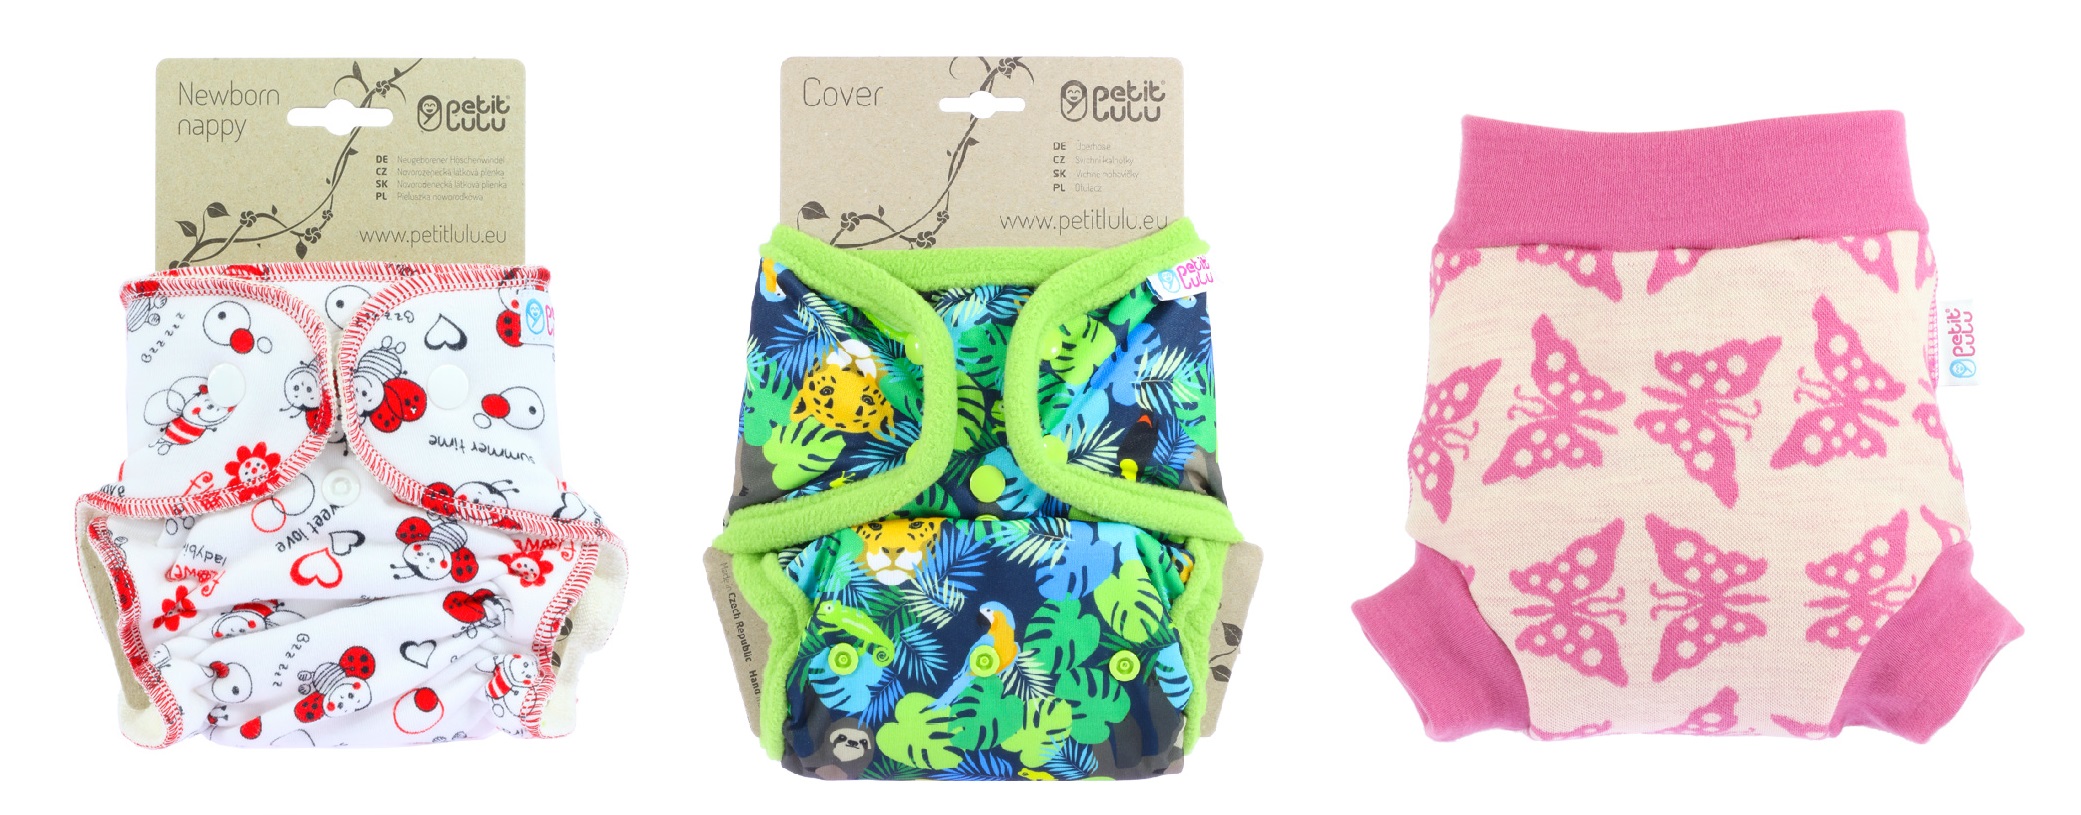 Kingdom of Fluff: Reusable Cloth Nappies & Nappy Accessories